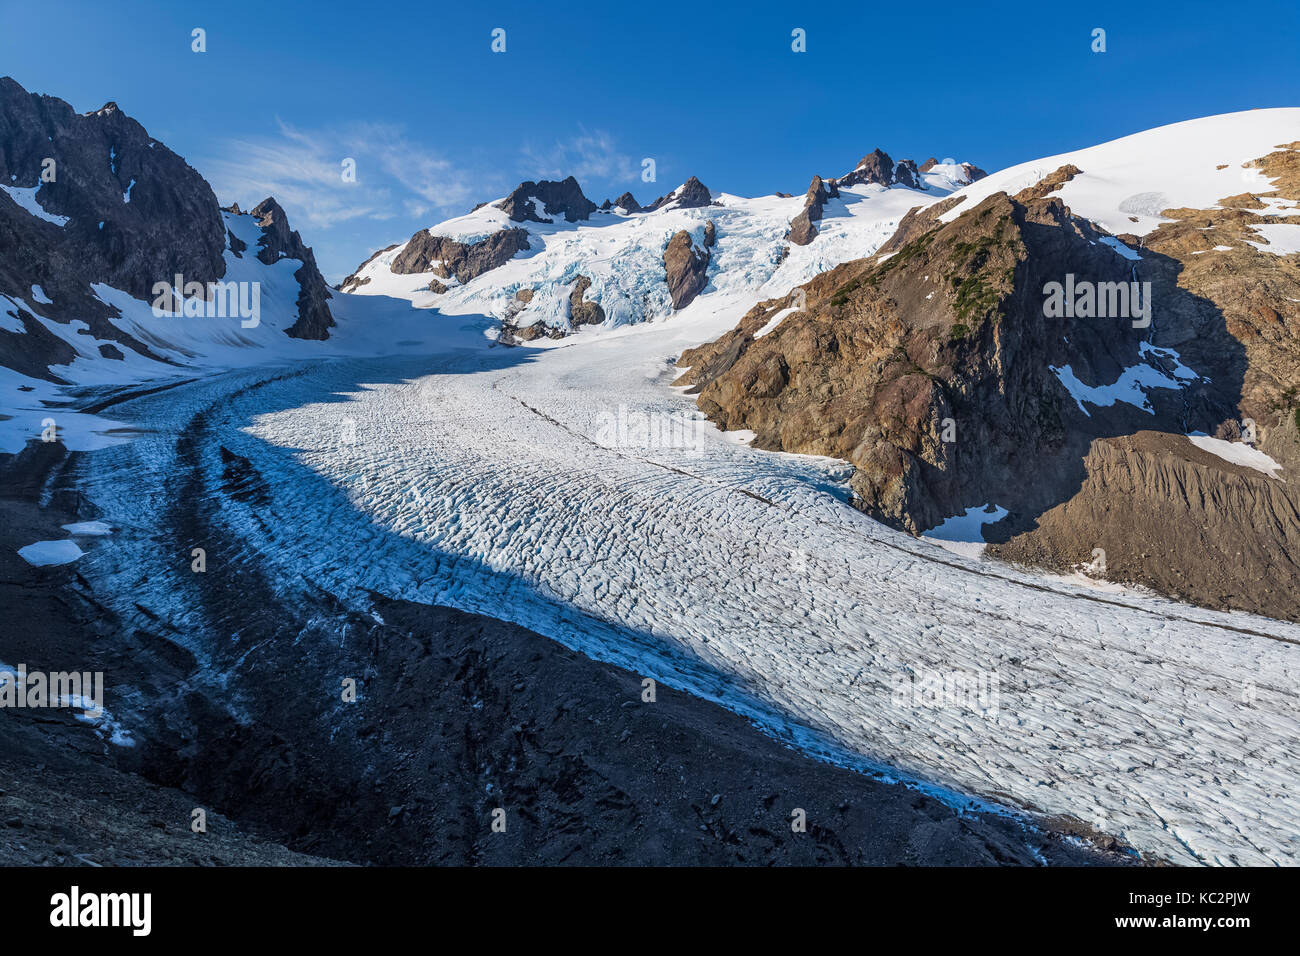 Blue Glacier And Mount Olympus In The Dramatic Setting At The End Of The Hoh River Trail In